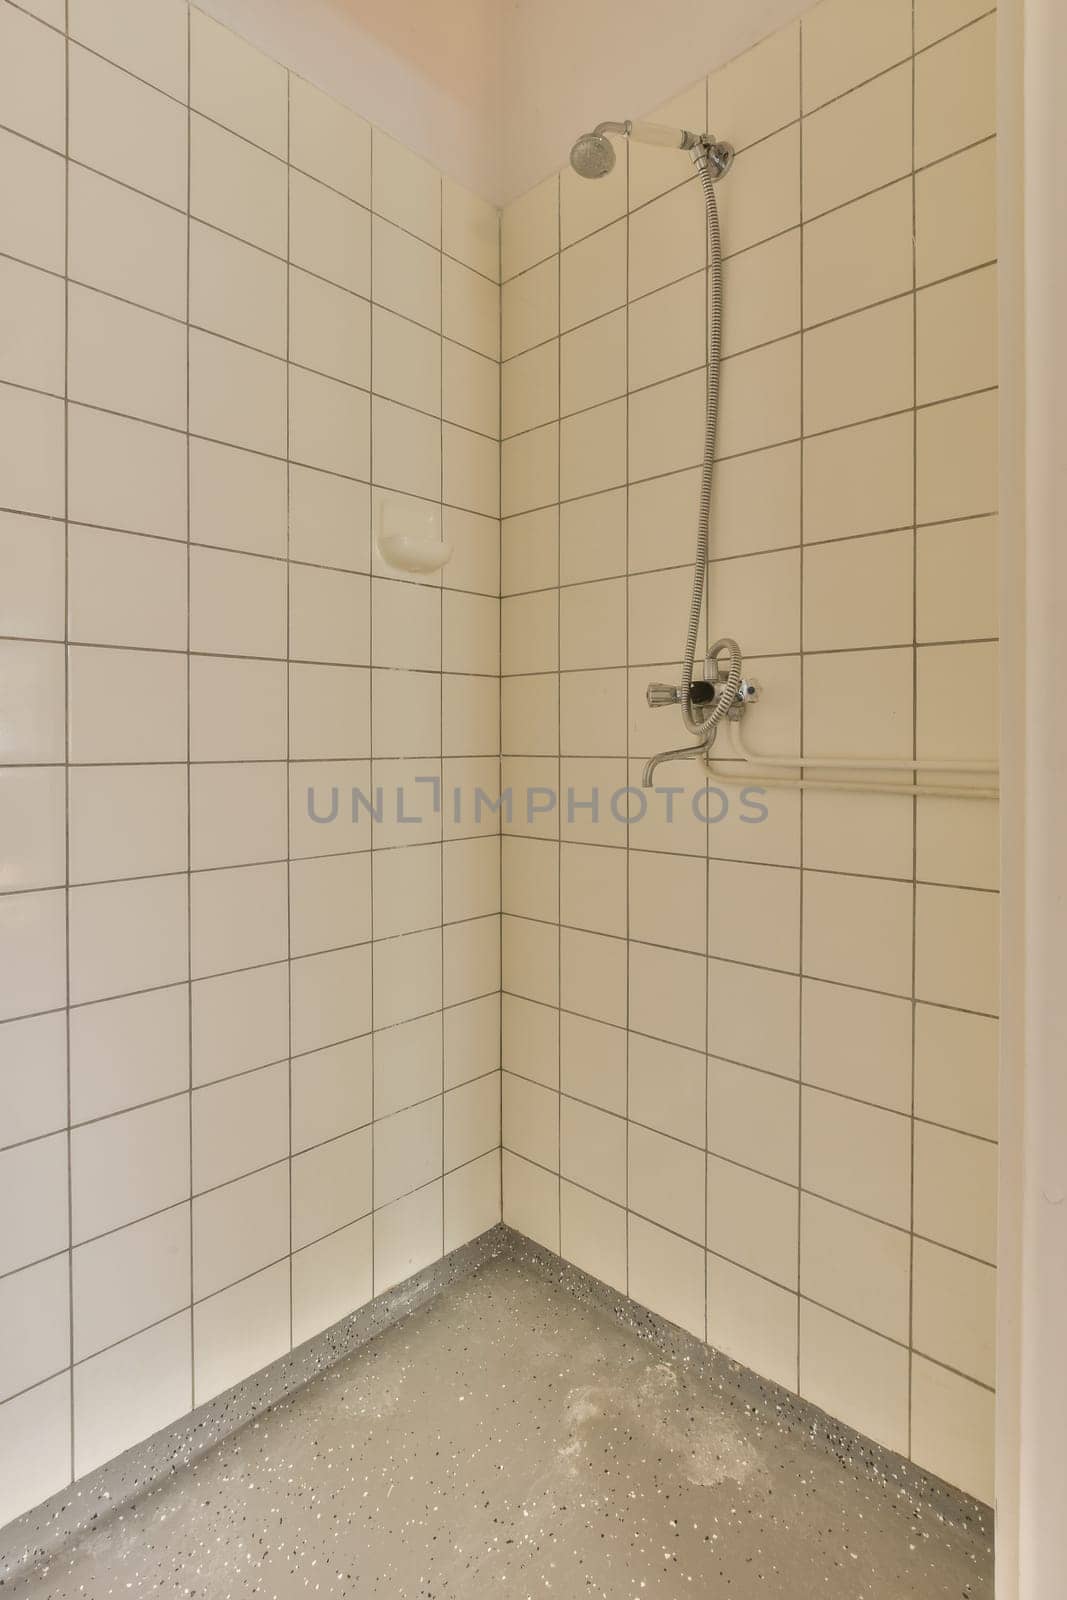 a shower stall with white tiles on the walls and floor in an empty room, it appears to be used as a bathroom